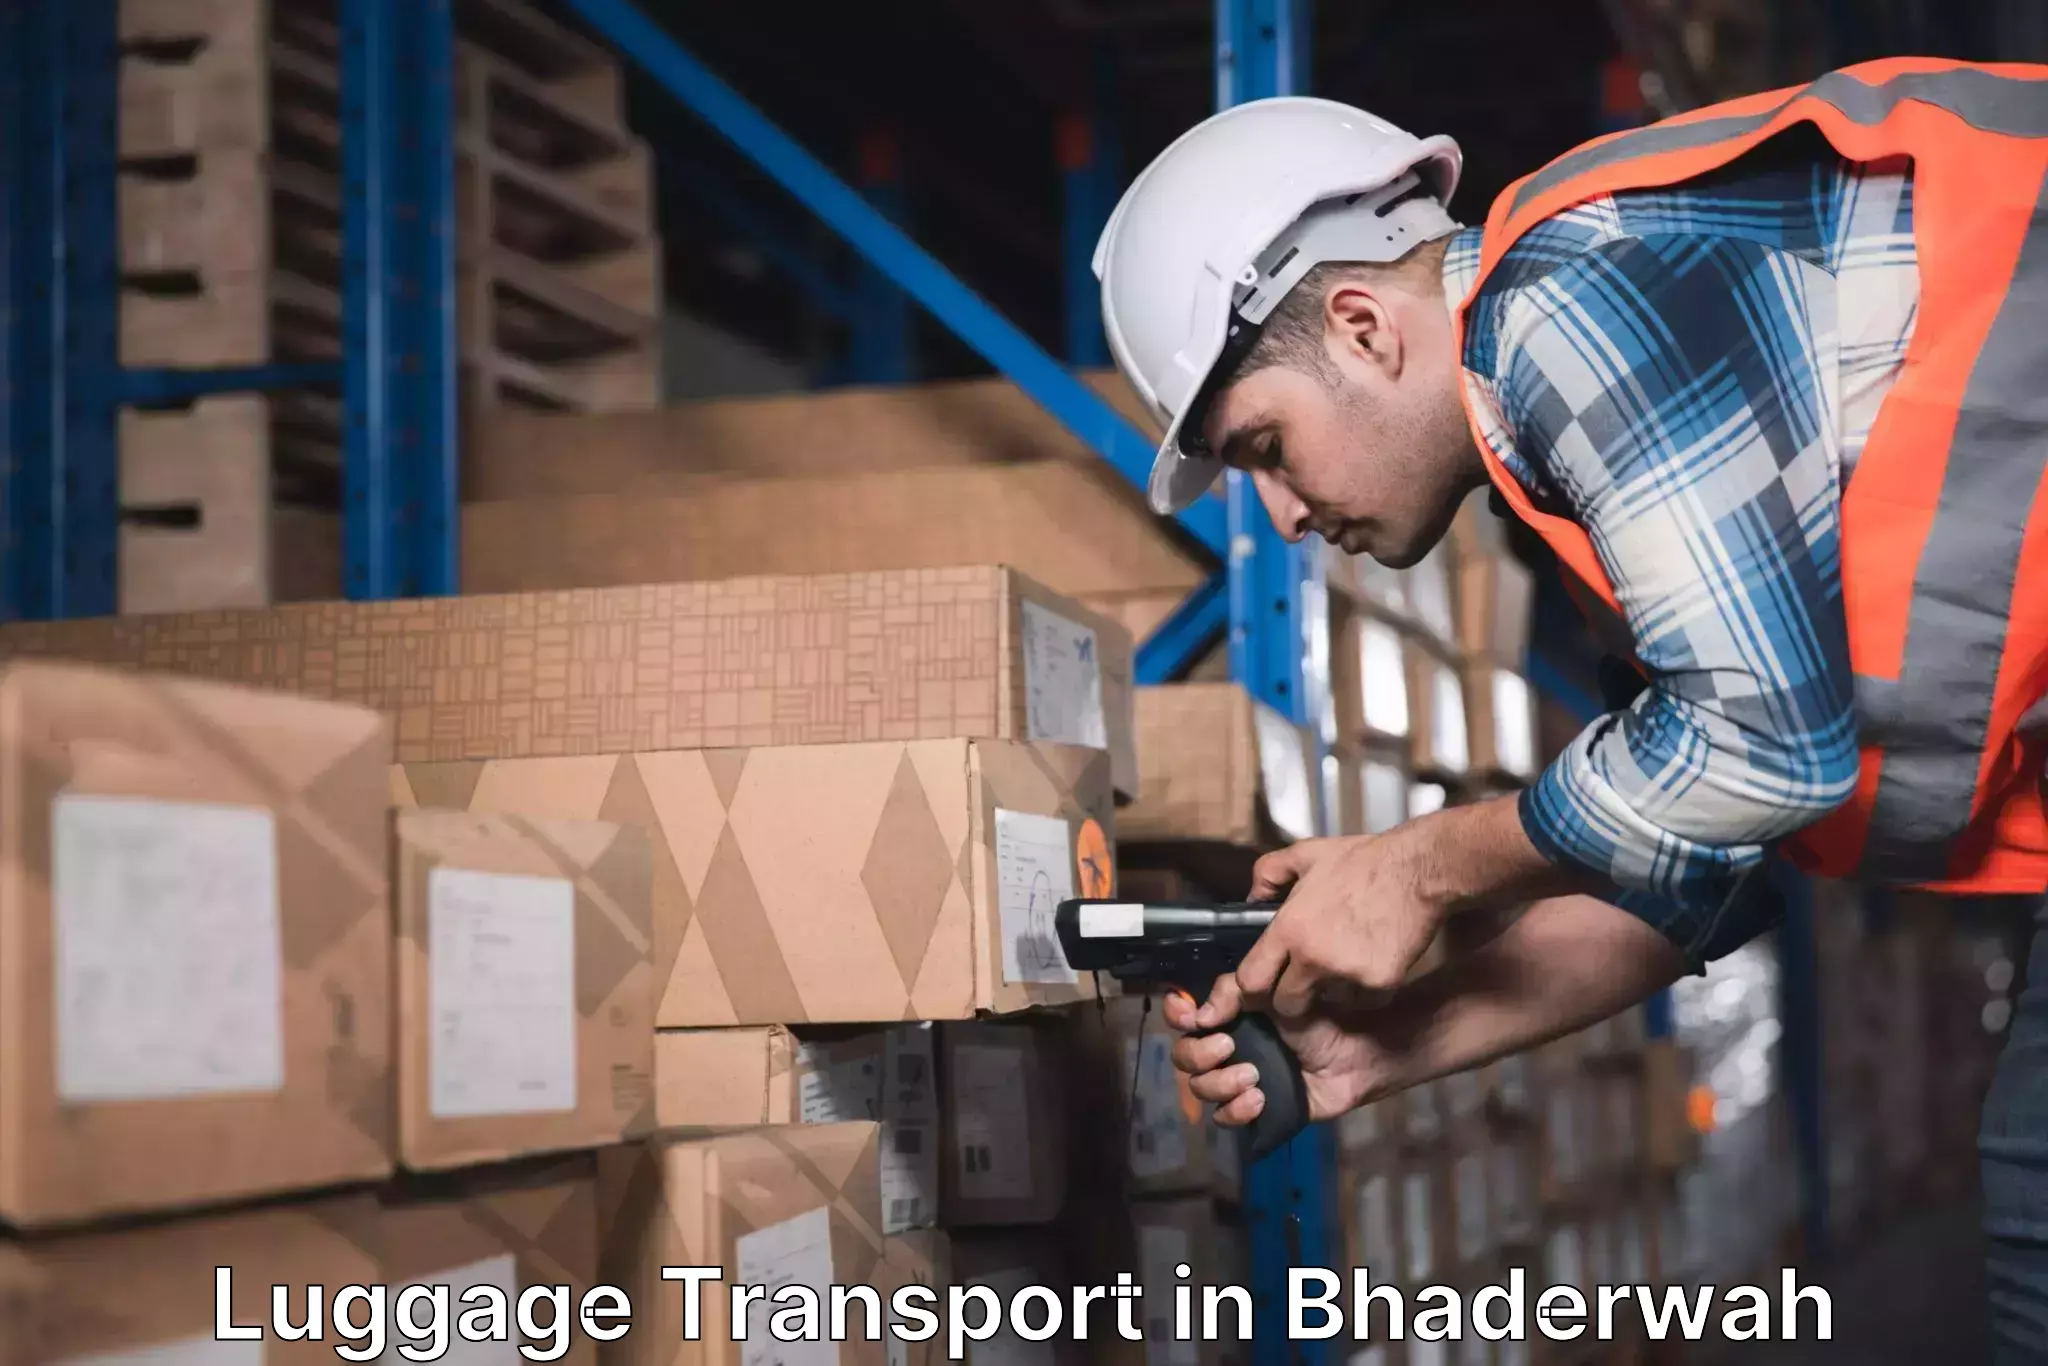 Luggage shipping trends in Bhaderwah